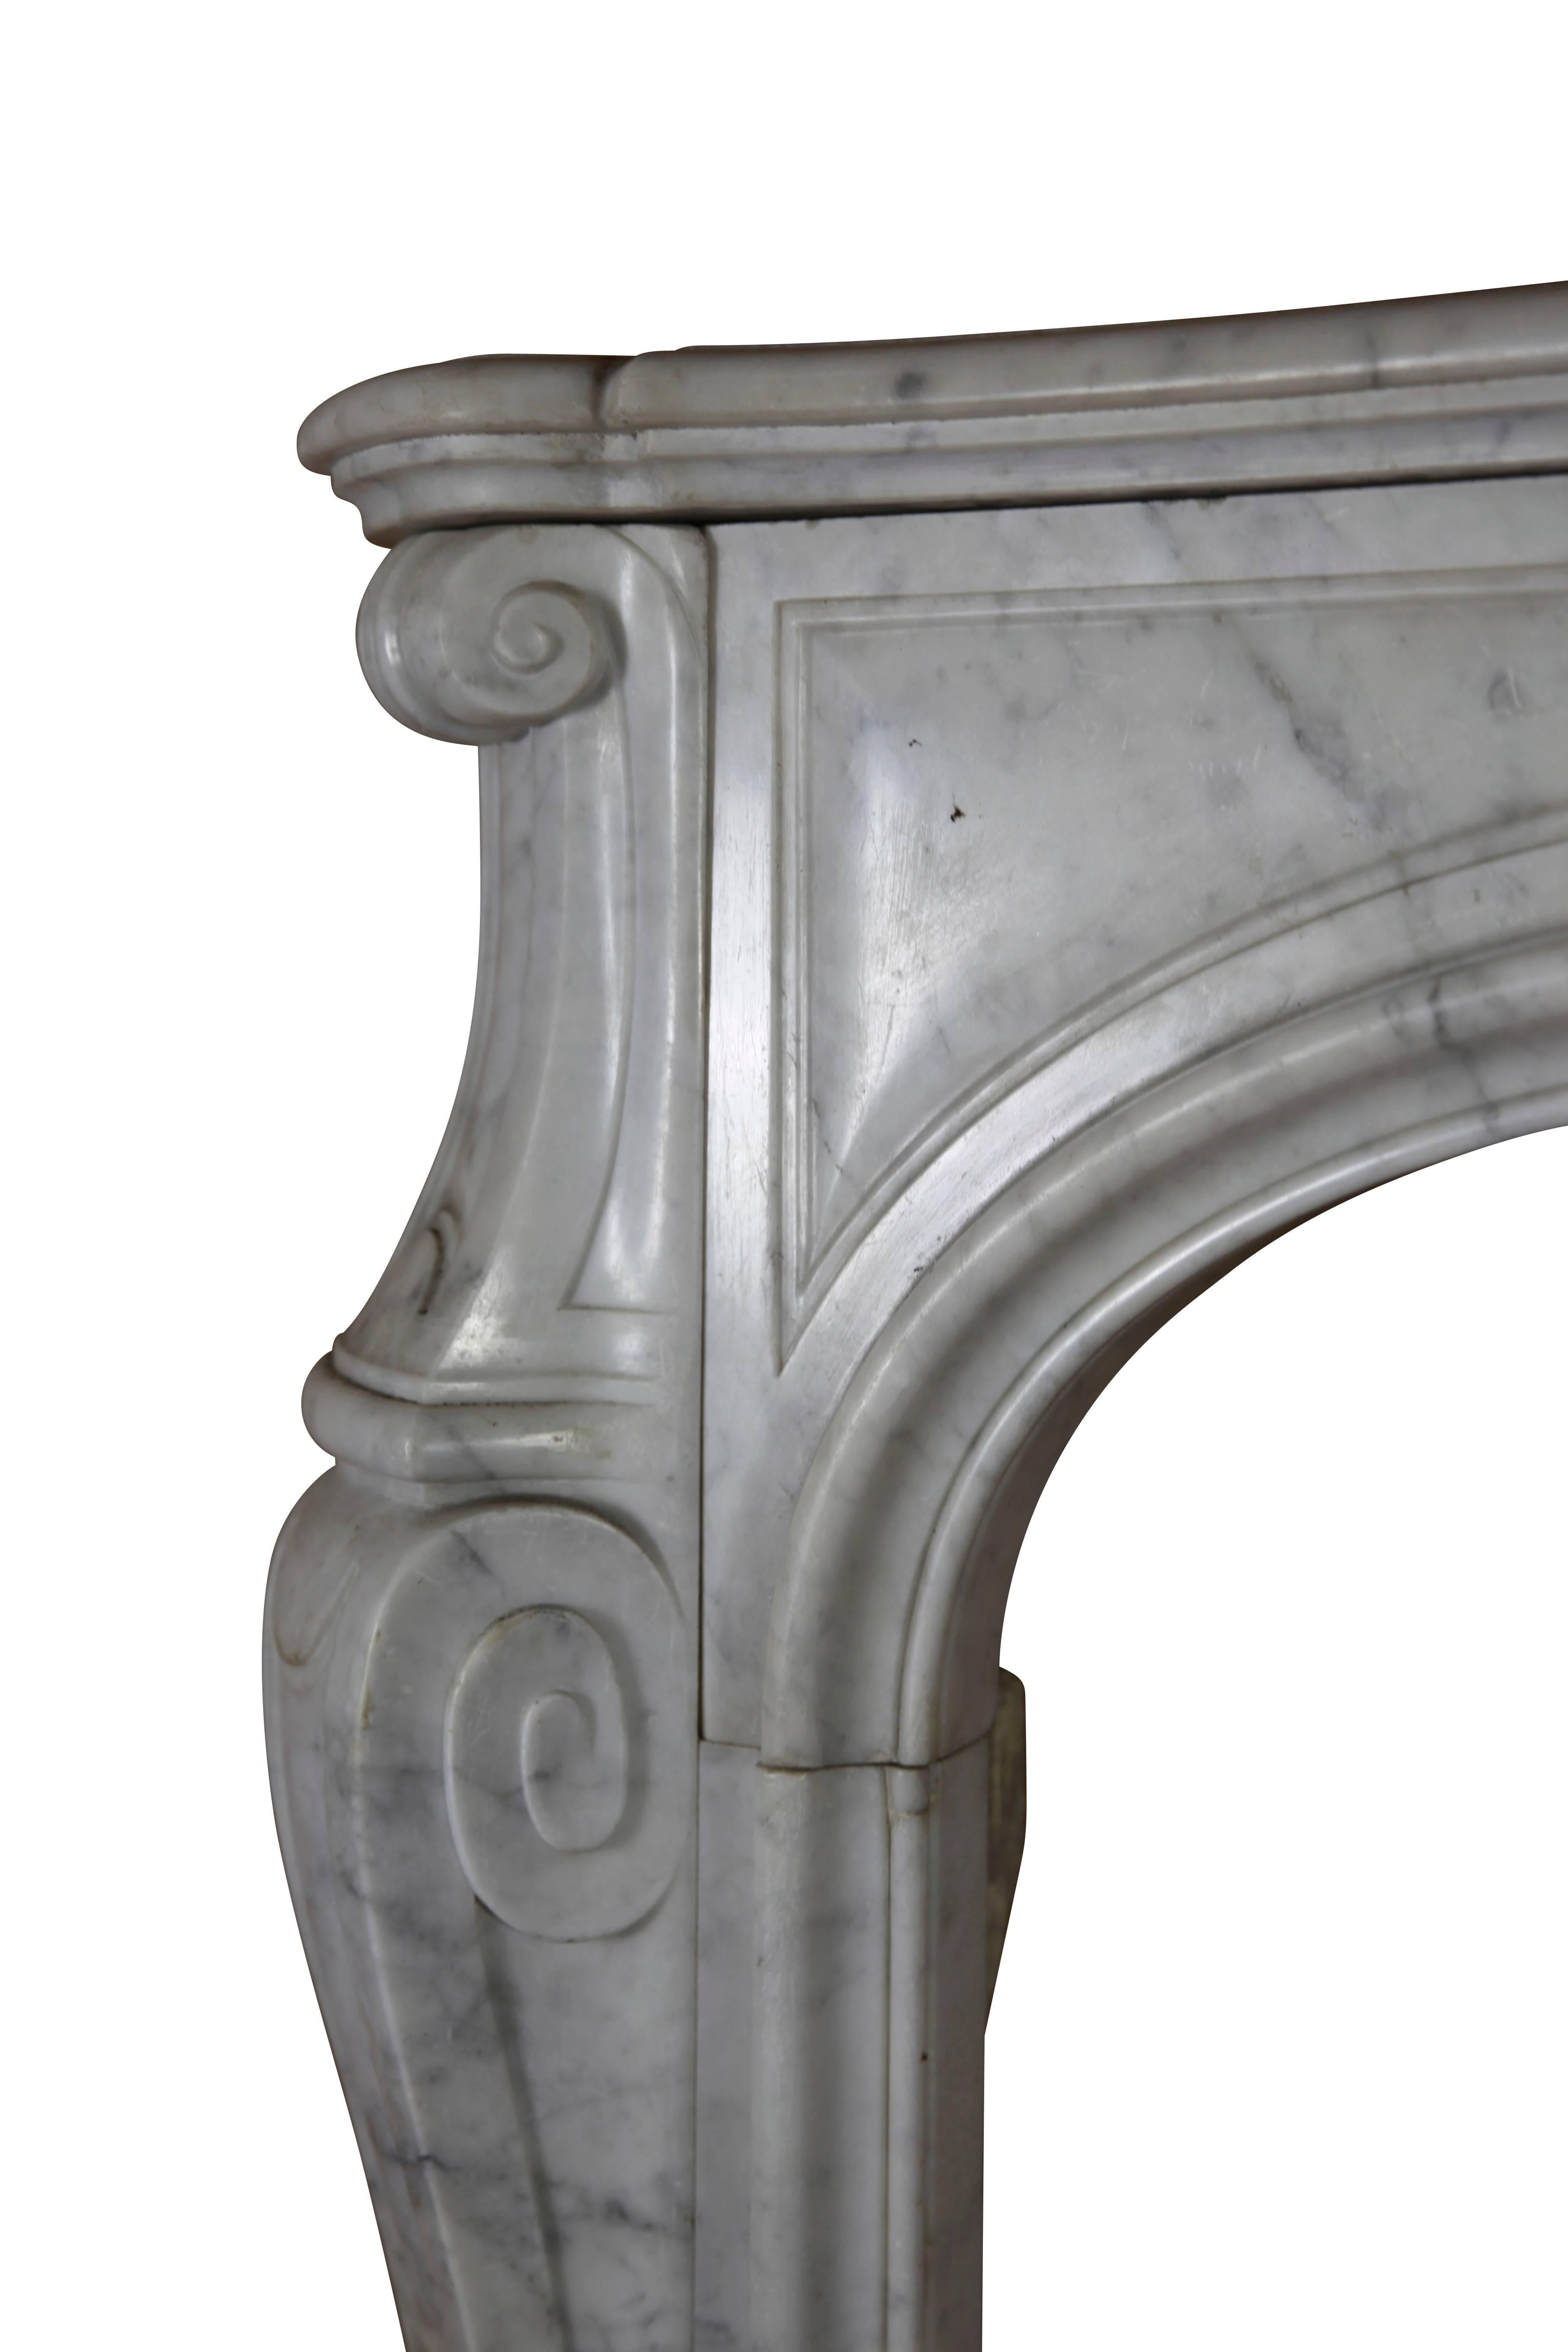 Louis XIV Fine Small French Carrara Marble Classic Antique Fireplace Surround For Sale